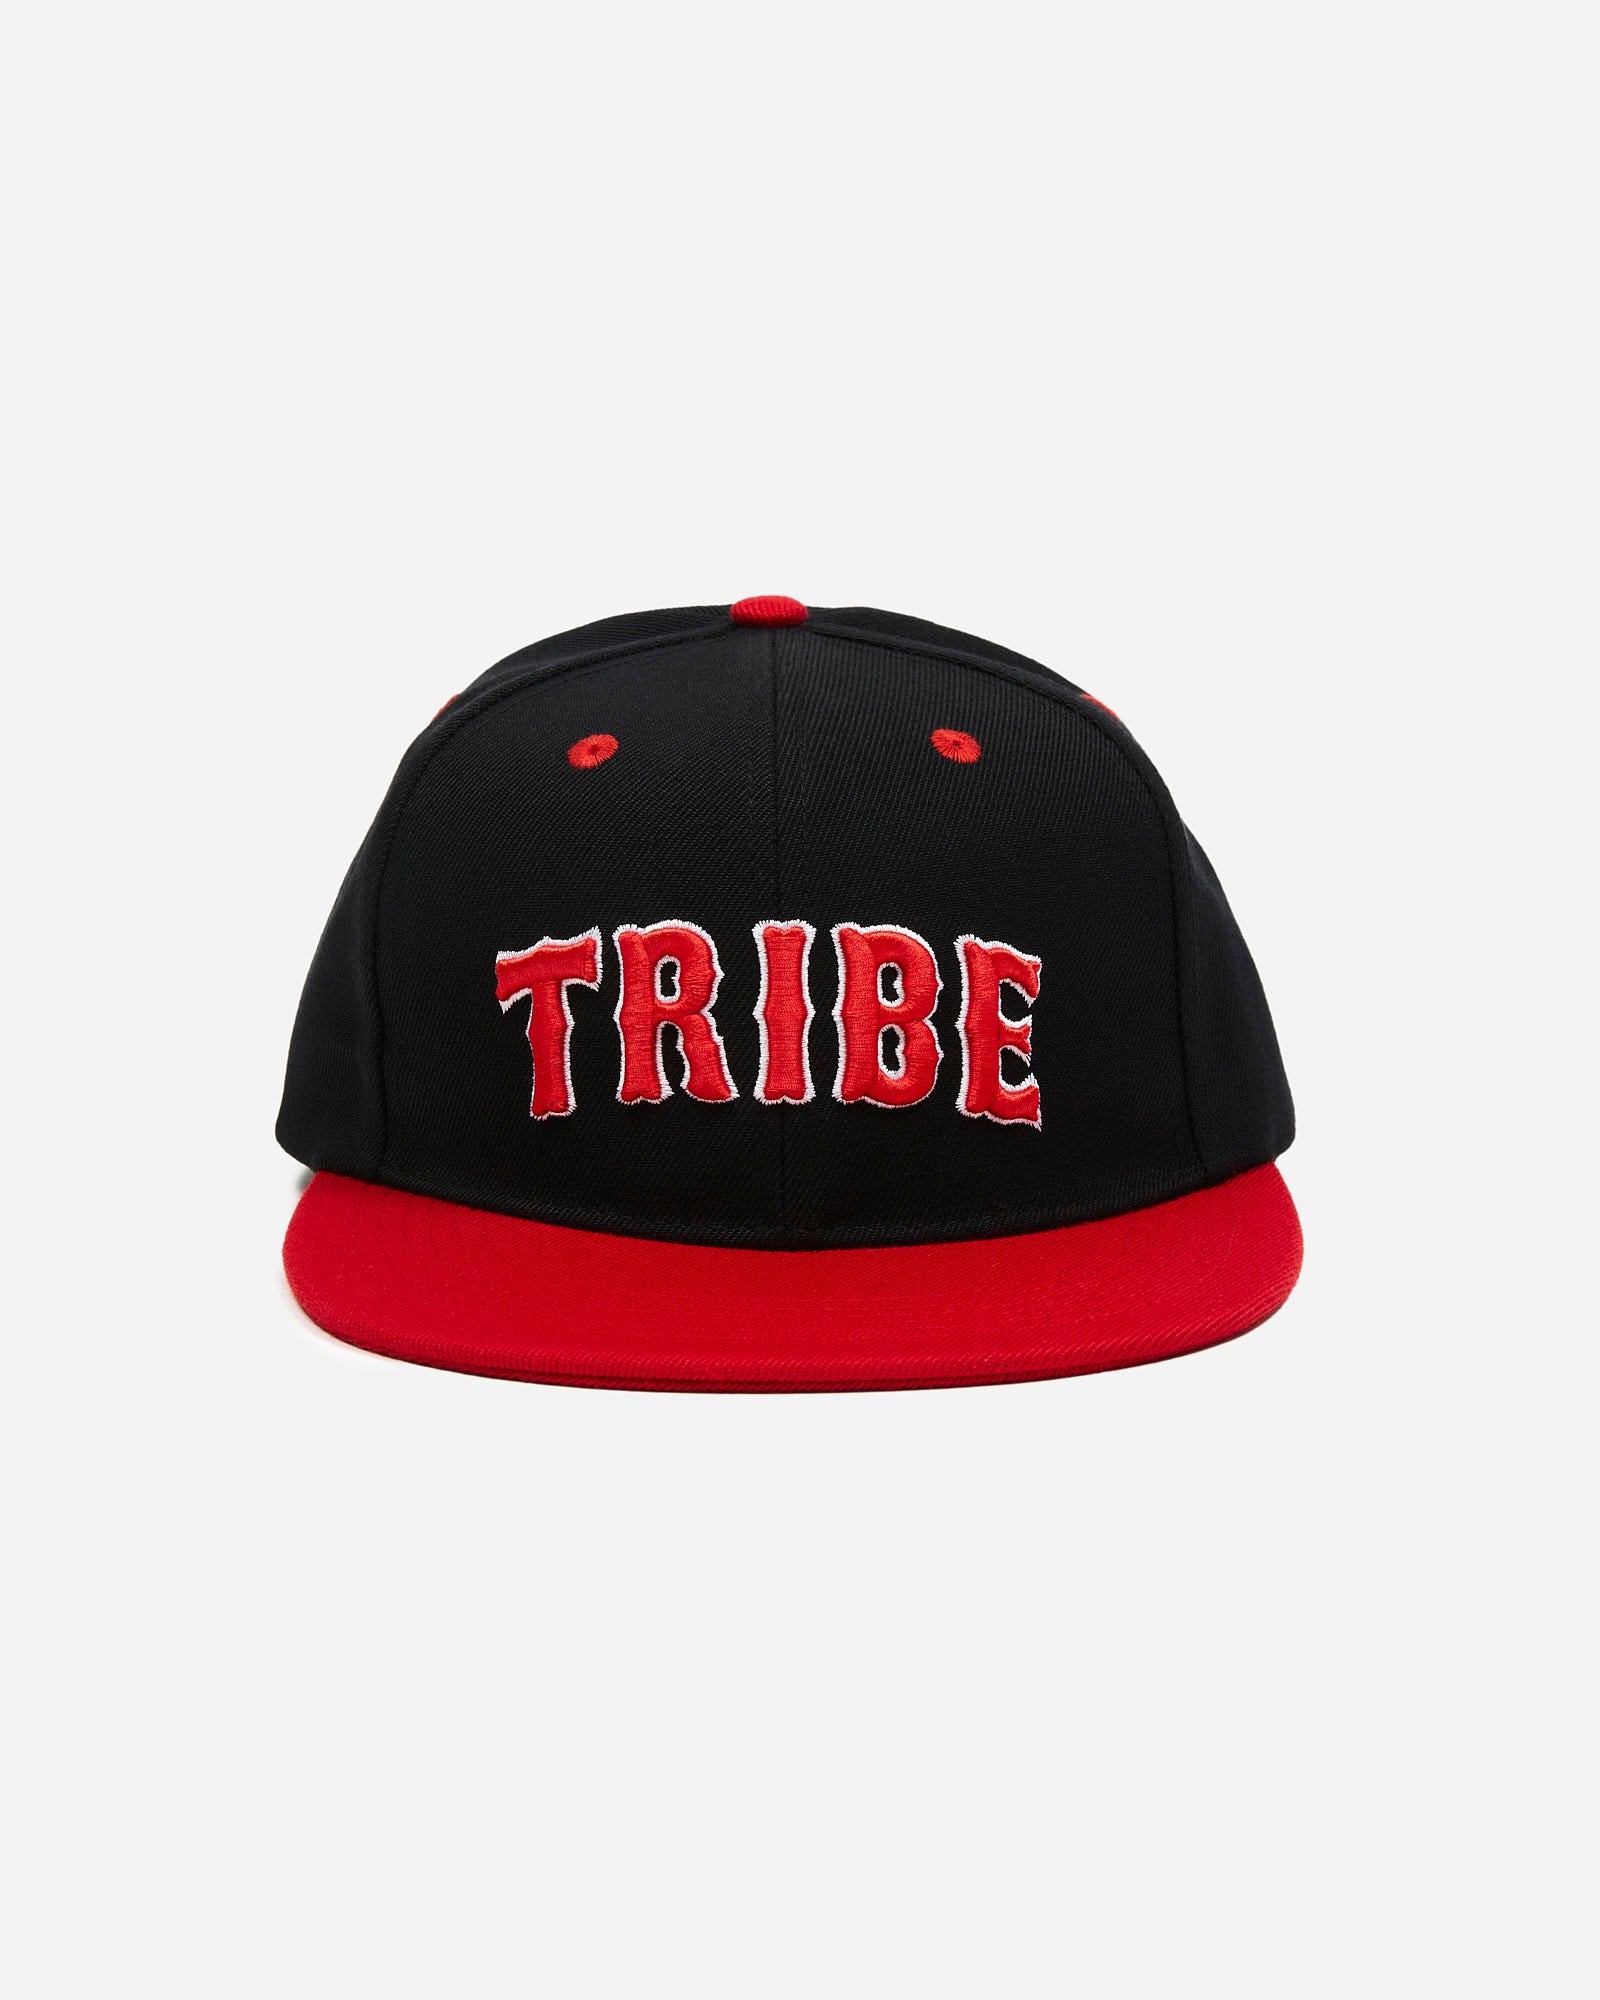 ATCQ Two Tone Snapback Red Hat